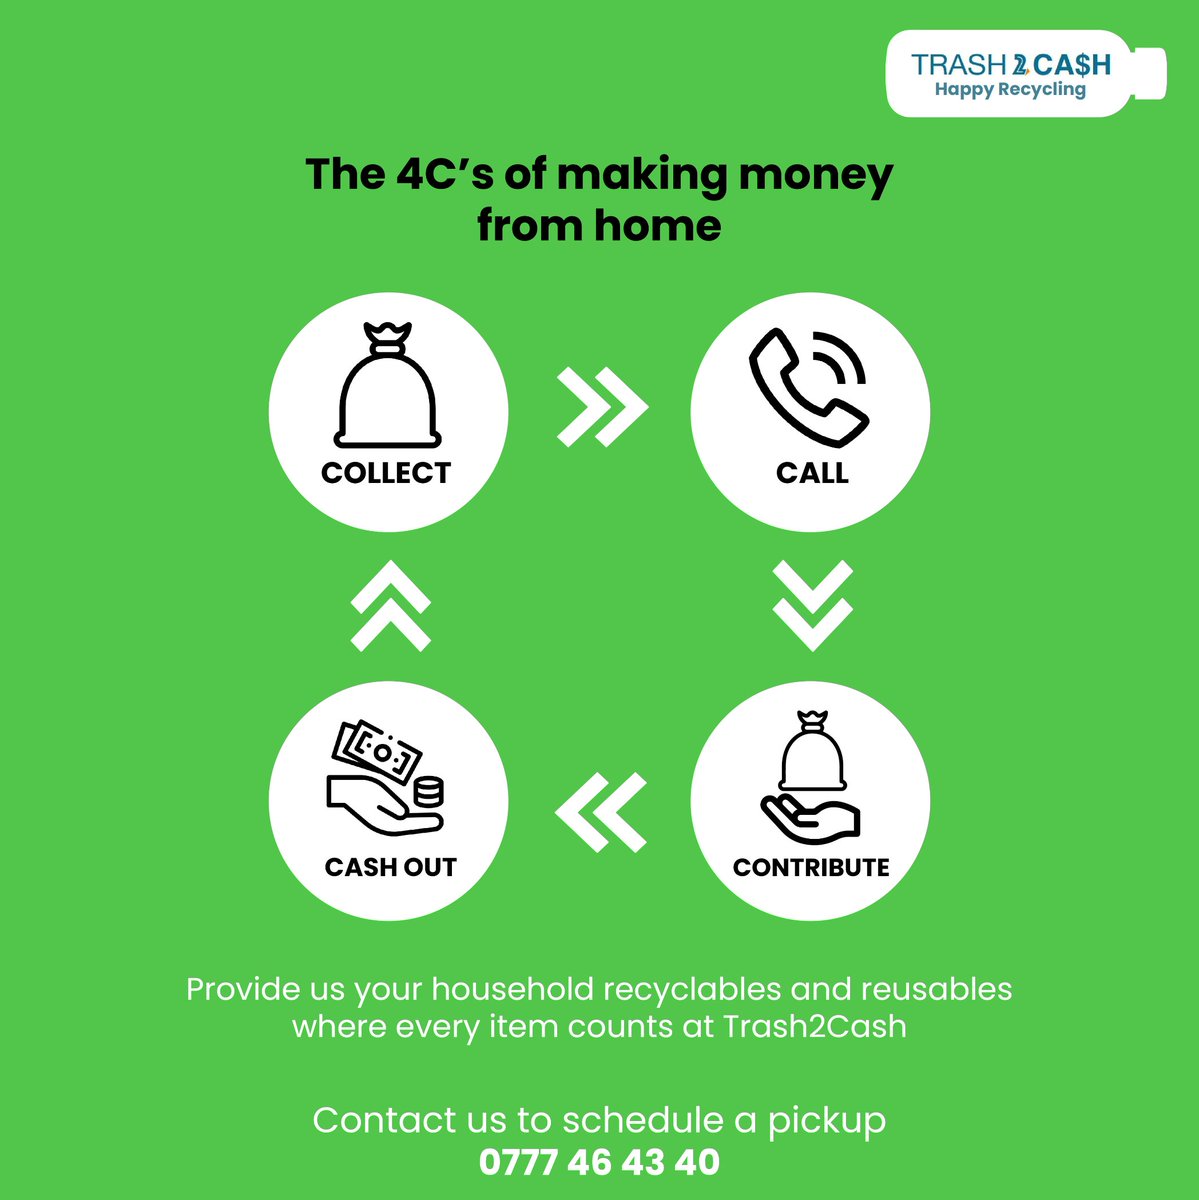 Turn your disposables into cash from home!​

​Contact our collectors : 0777 46 43 40​

​#trash2cash #recyclables #homecollection #oldclothes #oldbooks #chakrasuthra #plastic #recycle #reuse #earnmoney #cash #reuse #4cs #contribute #greenerfuture #households #ecofriendly